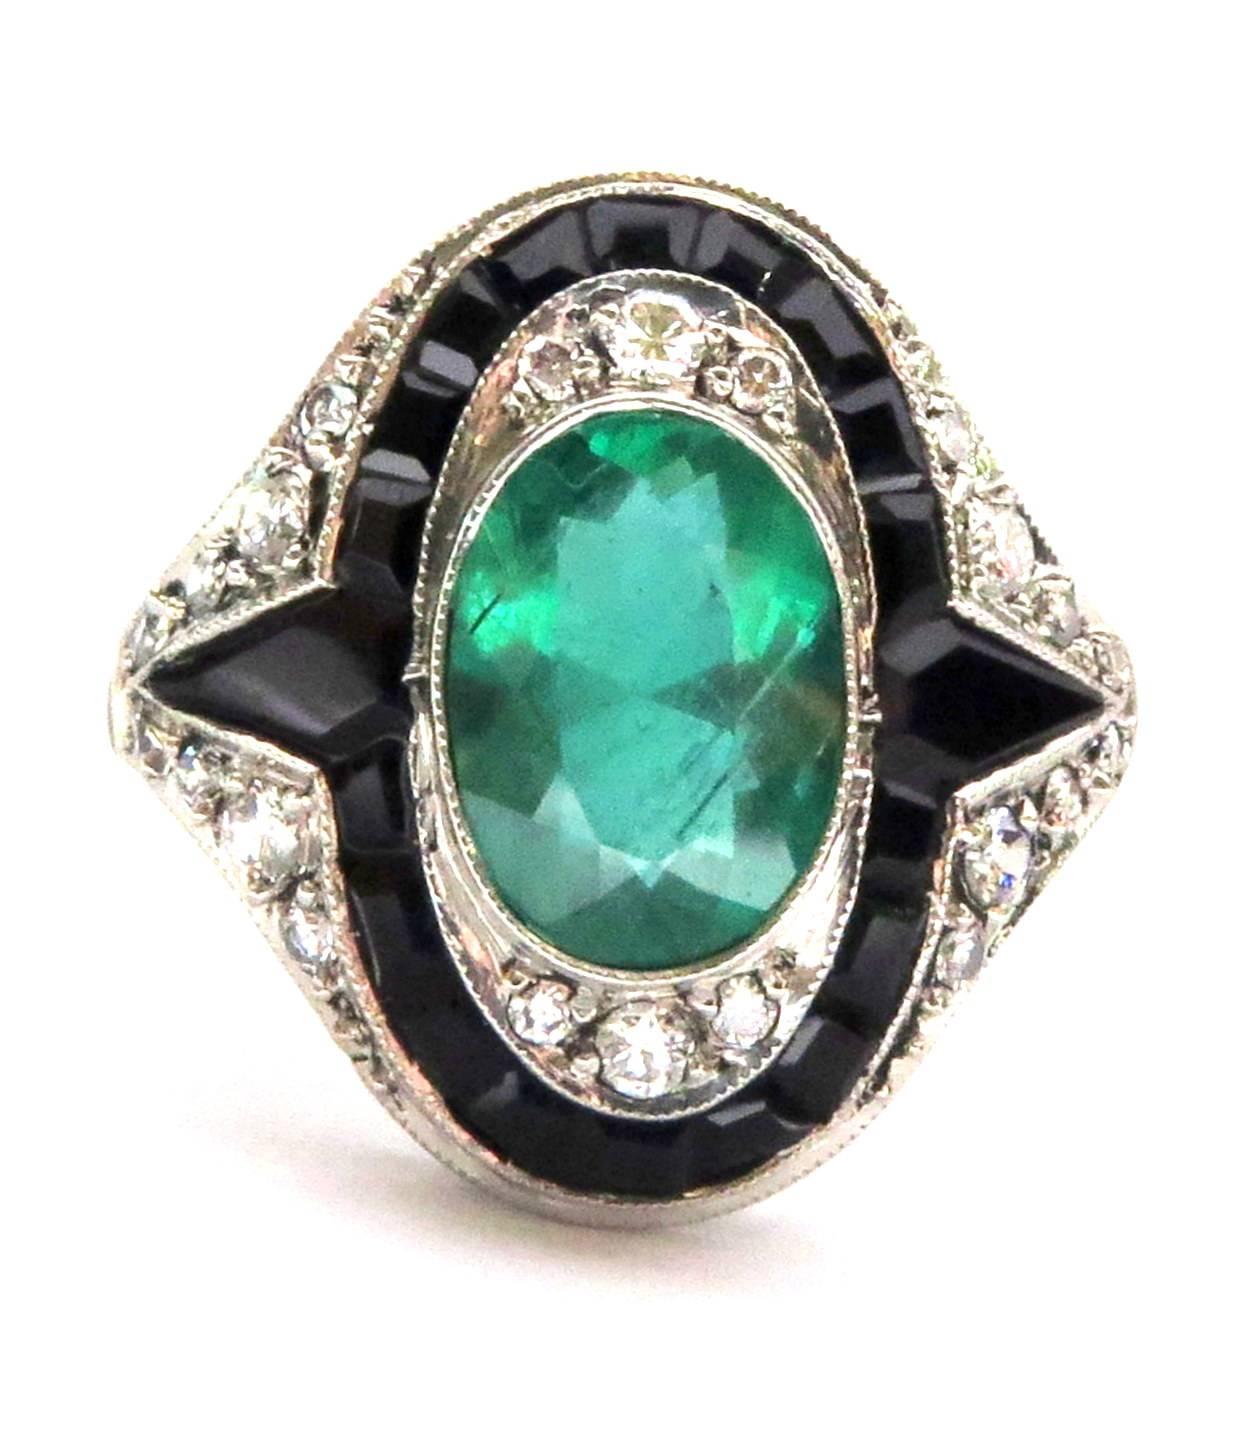 This gorgeous platinum large oval bezel set emerald ring is surrounded by diamonds and calibrated onyx. This versatile ring which  can be dressed up or down has a very important look.  The emerald is approx 2 1/2 carats.
This ring is a size 7 and